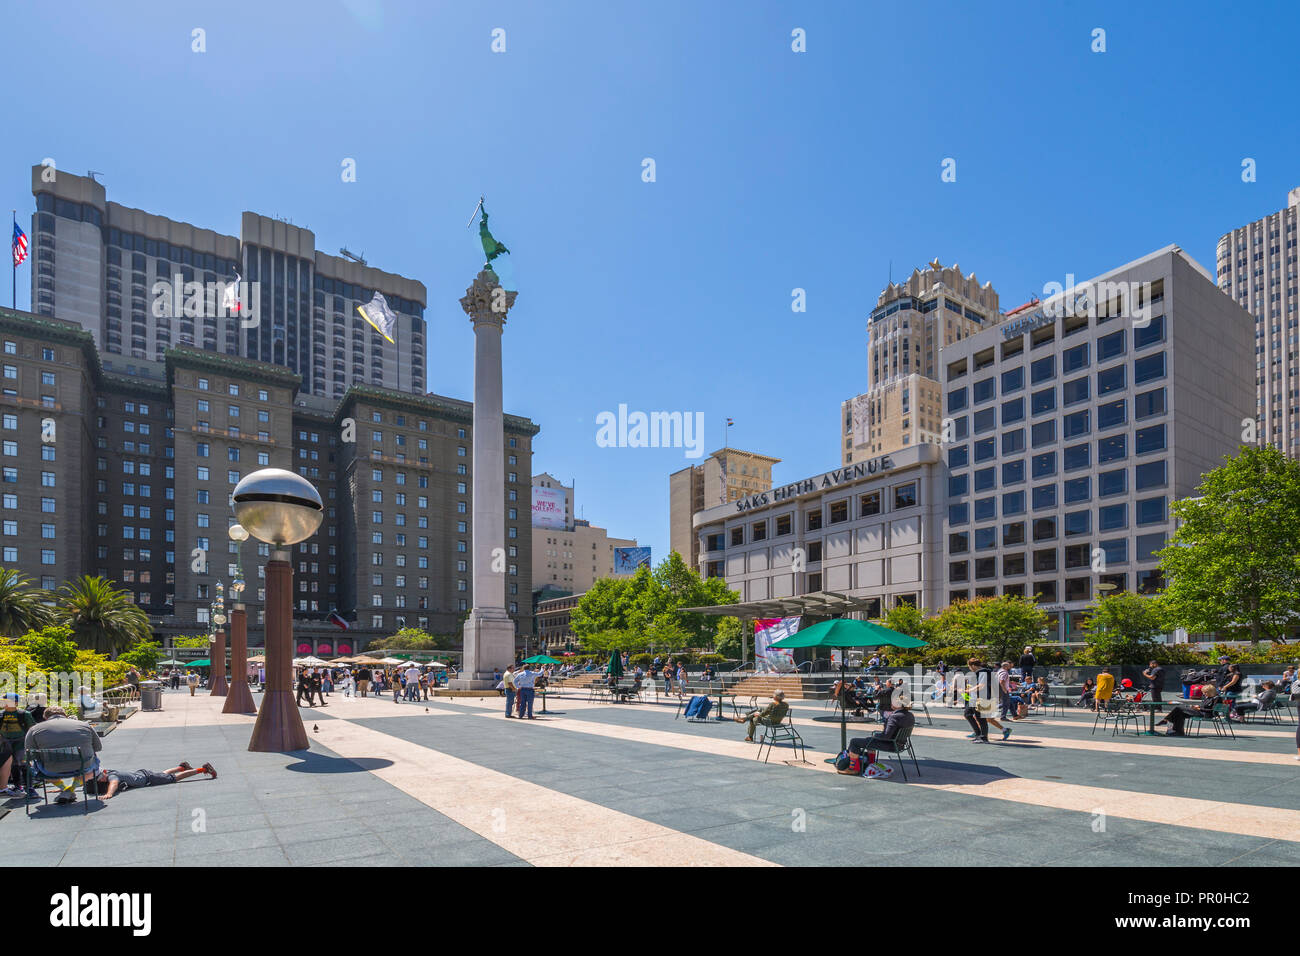 View of buildings and visitors in Union Square, San Francisco, California, United States of America, North America Stock Photo